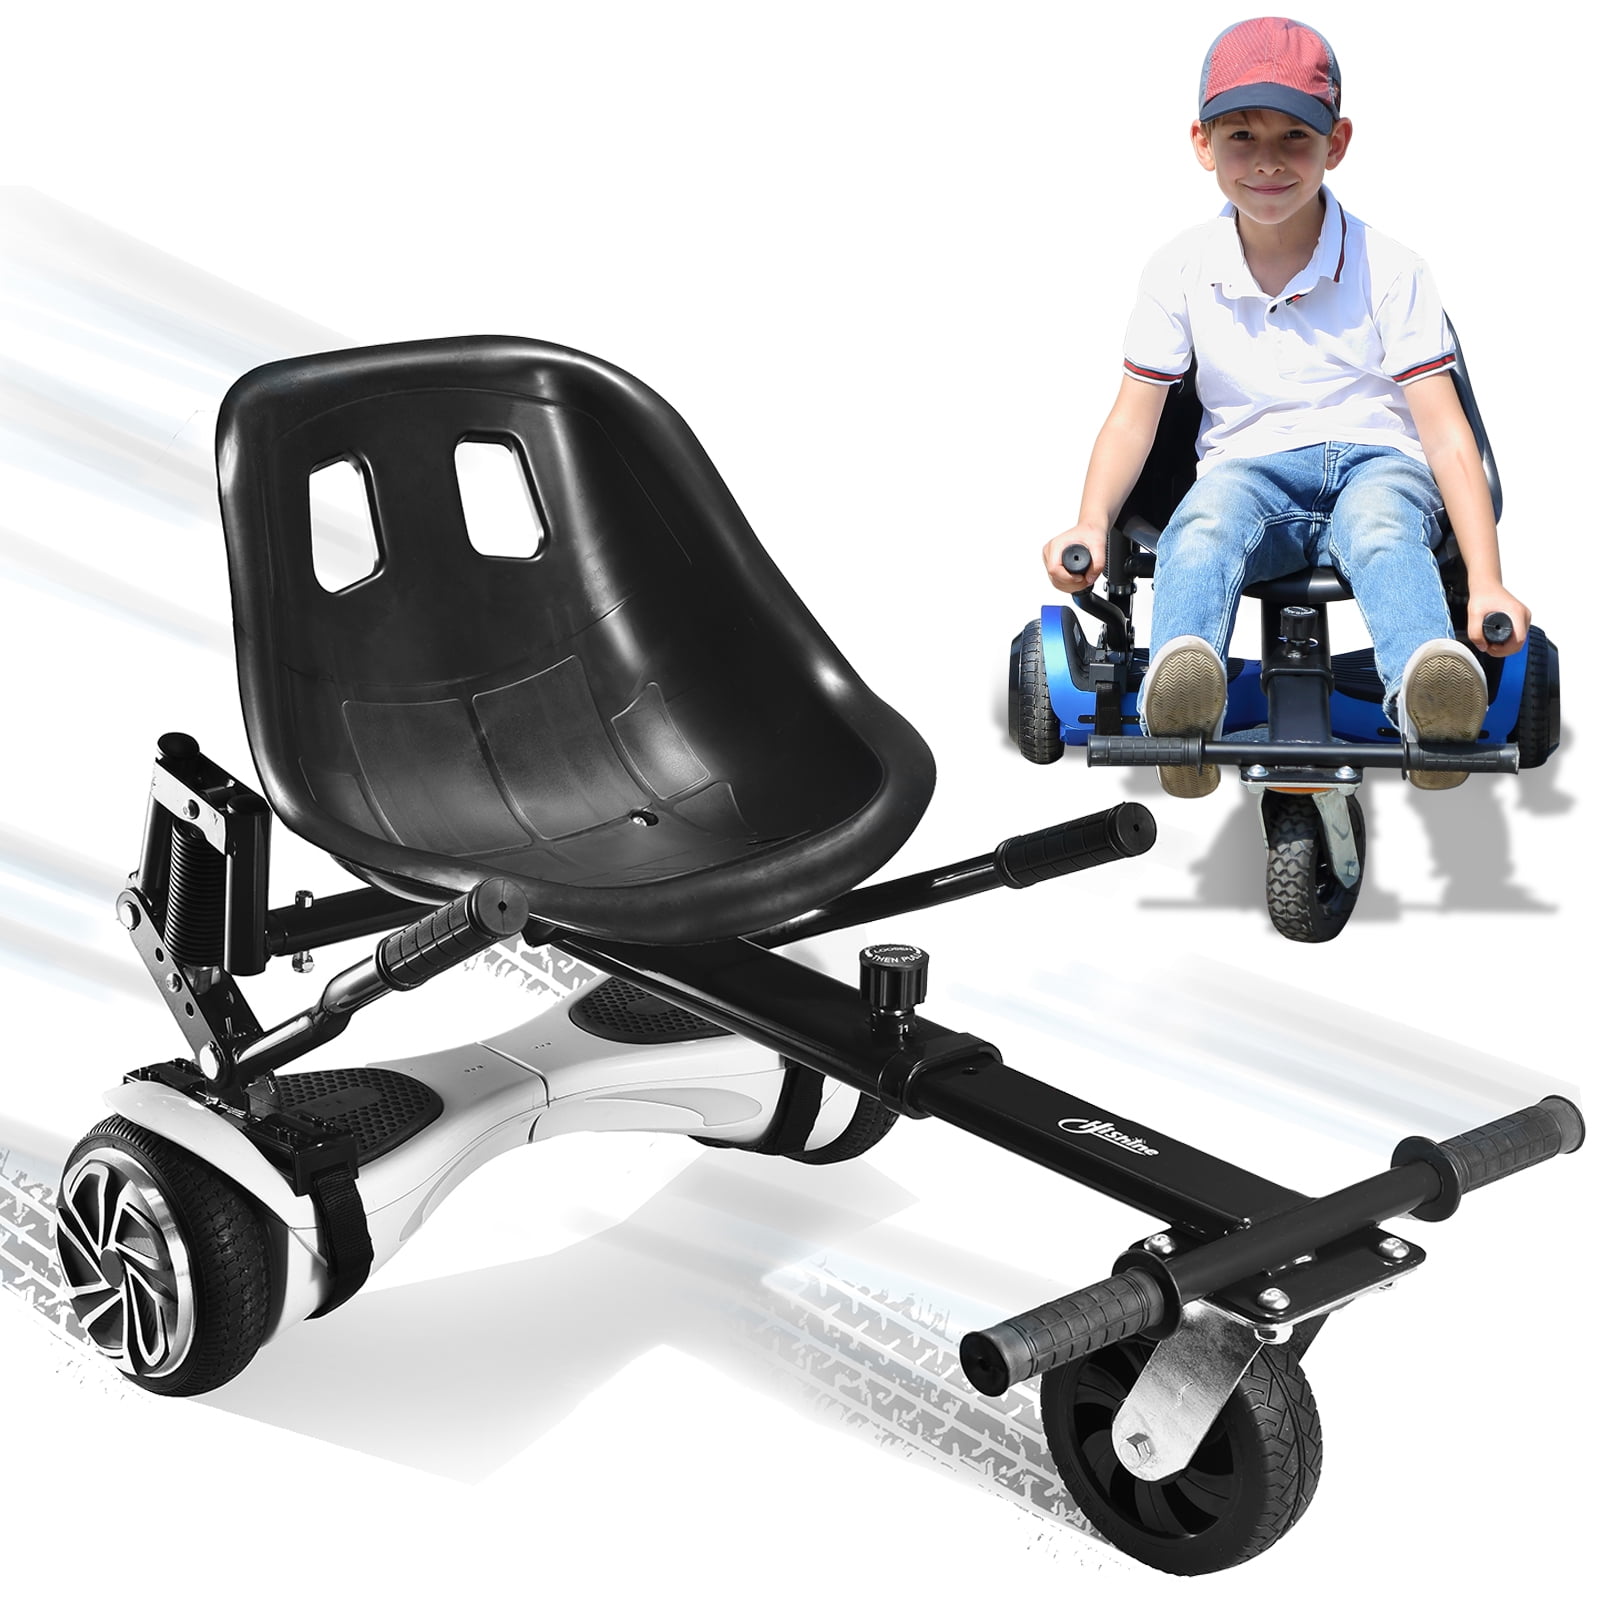 Wide Chair Fits 6.5 8 10 Easy to Control Hoverboard Seat Attachment for Self Balancing Scooter Go Kart Conversion Kit with Adjustable Frame Blue Hover Board Accessories for Kids Adults